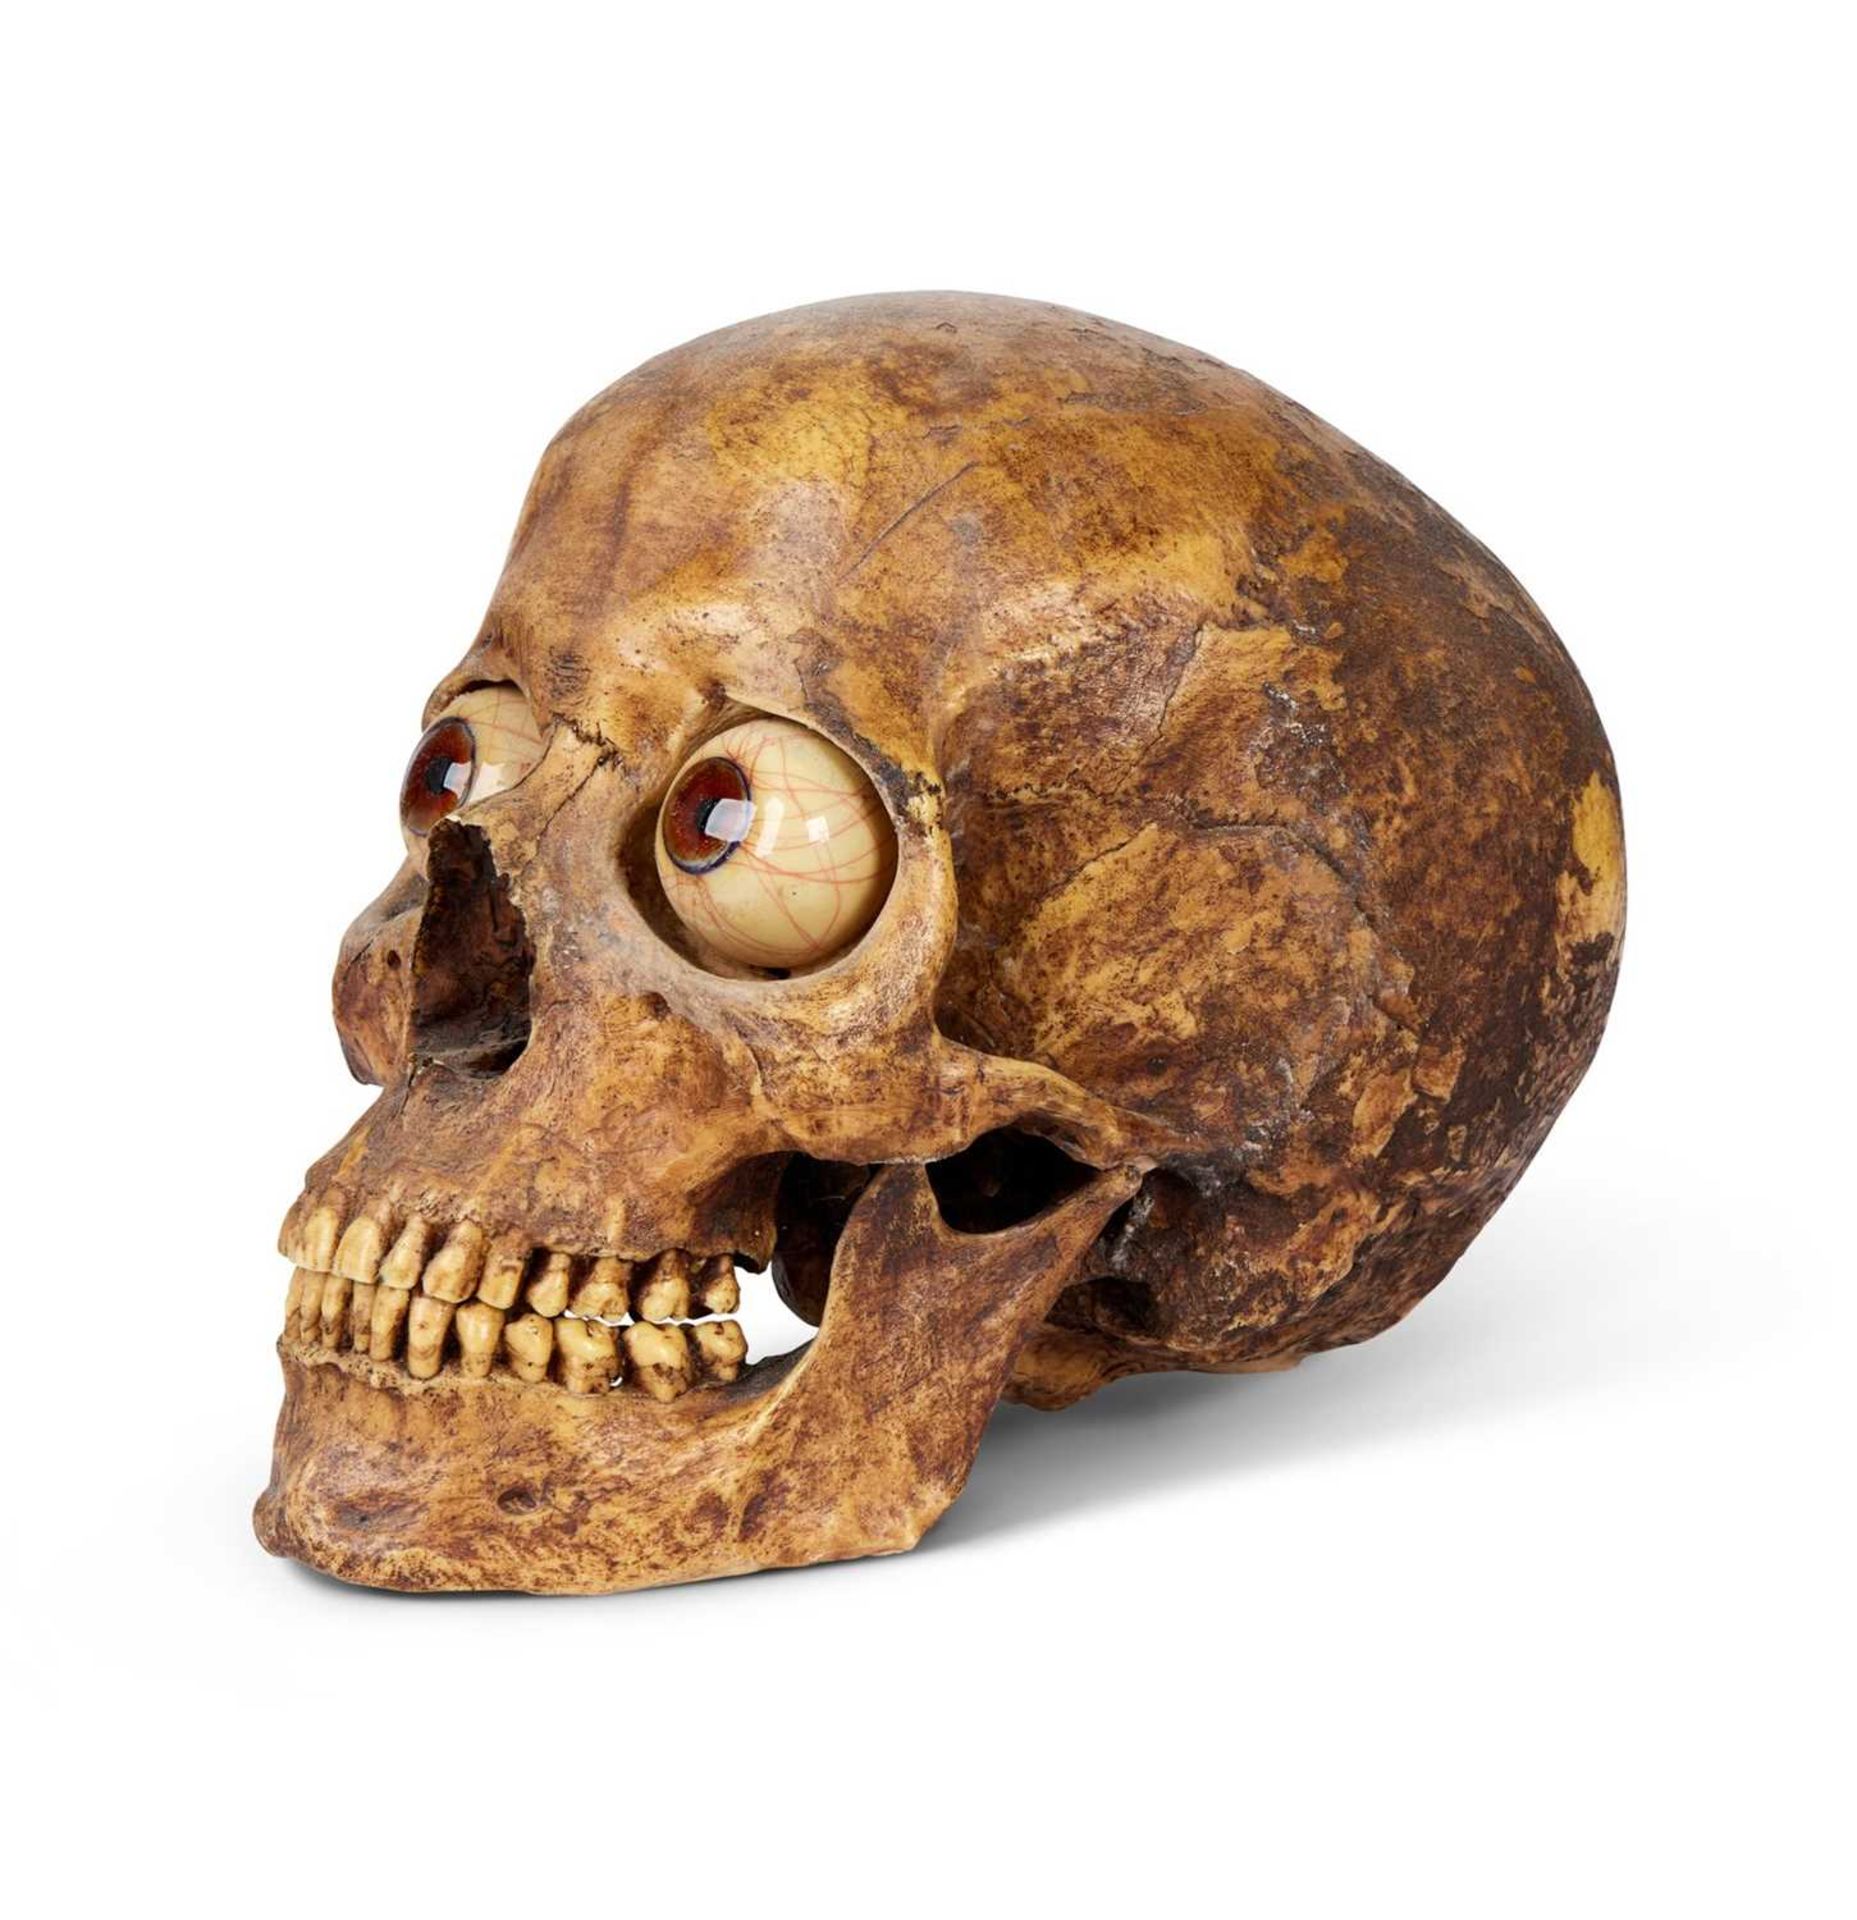 A CAST OF A HUMAN SKULL WITH GLASS EYES